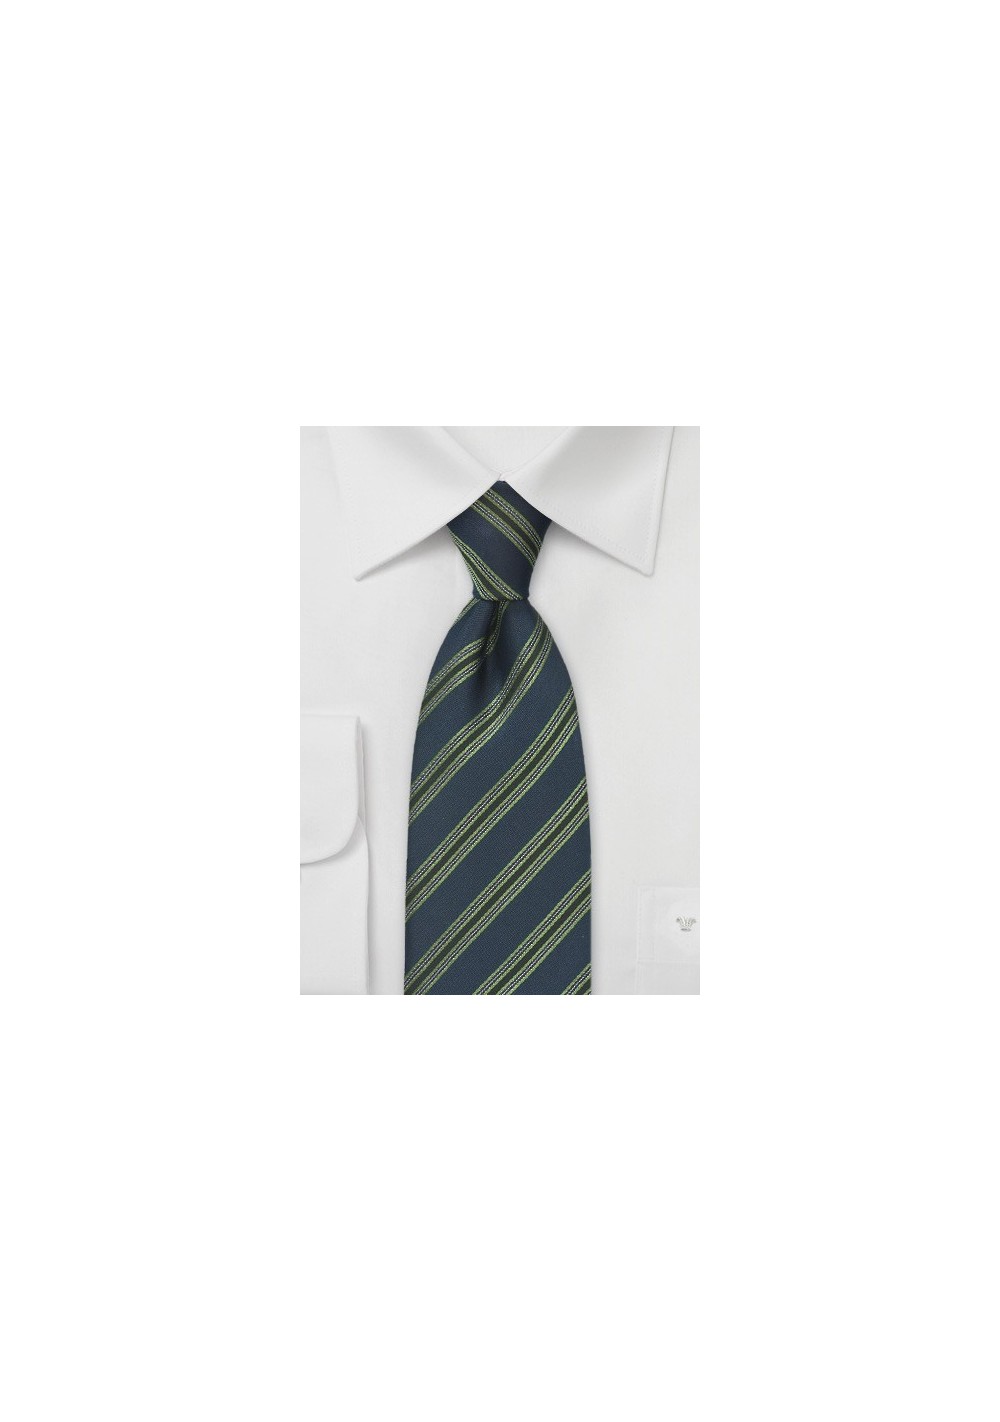 Striped Tie in Navy and Green